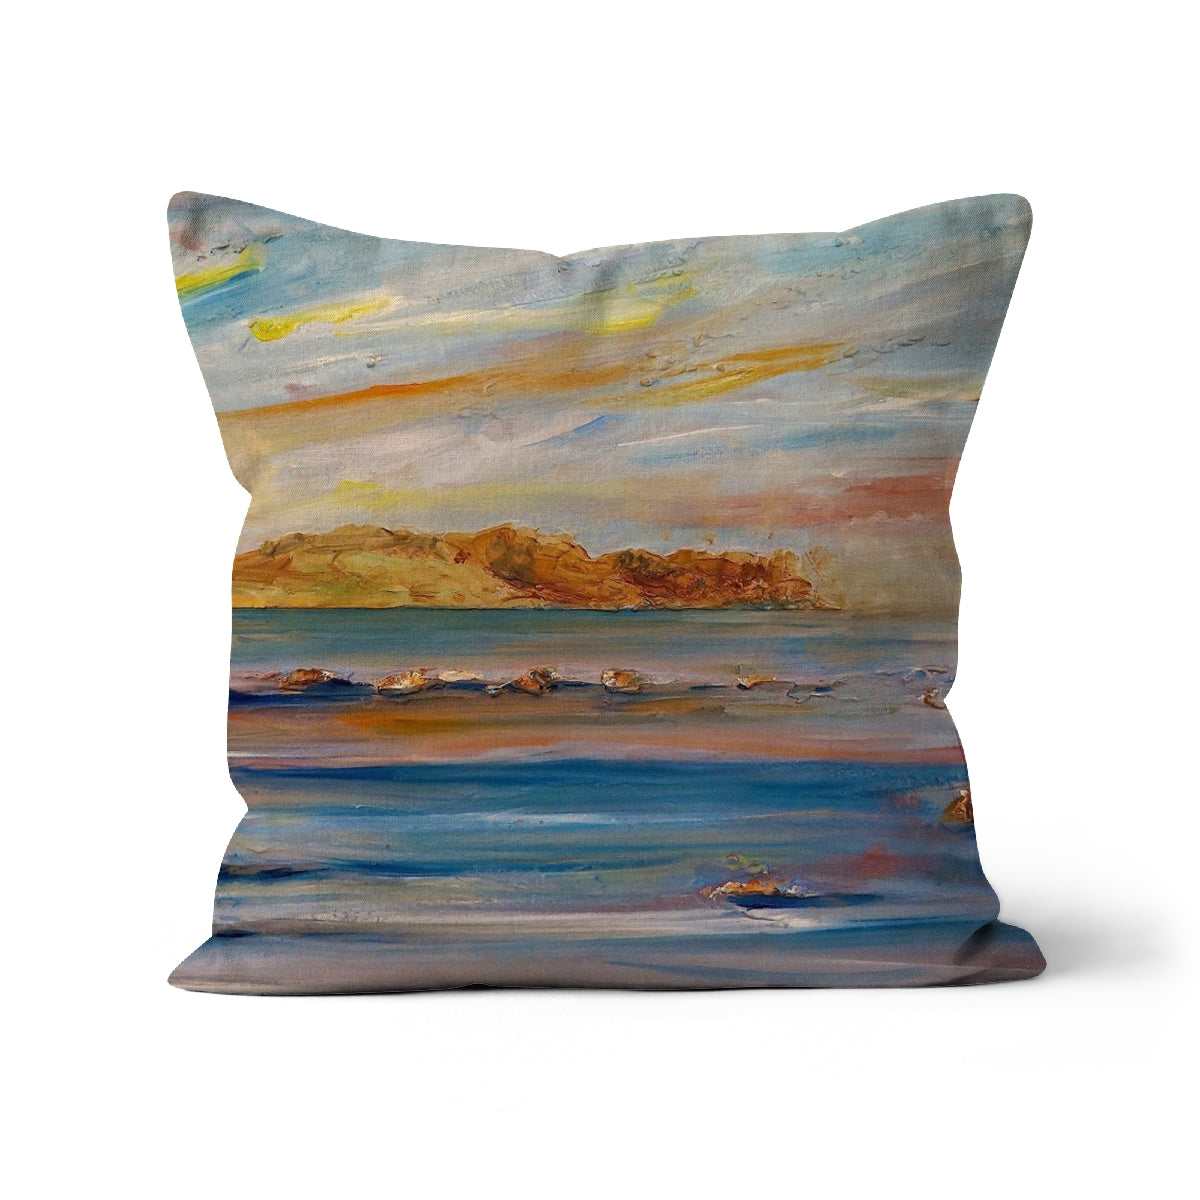 Tiree Dawn Art Gifts Cushion-Cushions-Hebridean Islands Art Gallery-Canvas-12"x12"-Paintings, Prints, Homeware, Art Gifts From Scotland By Scottish Artist Kevin Hunter